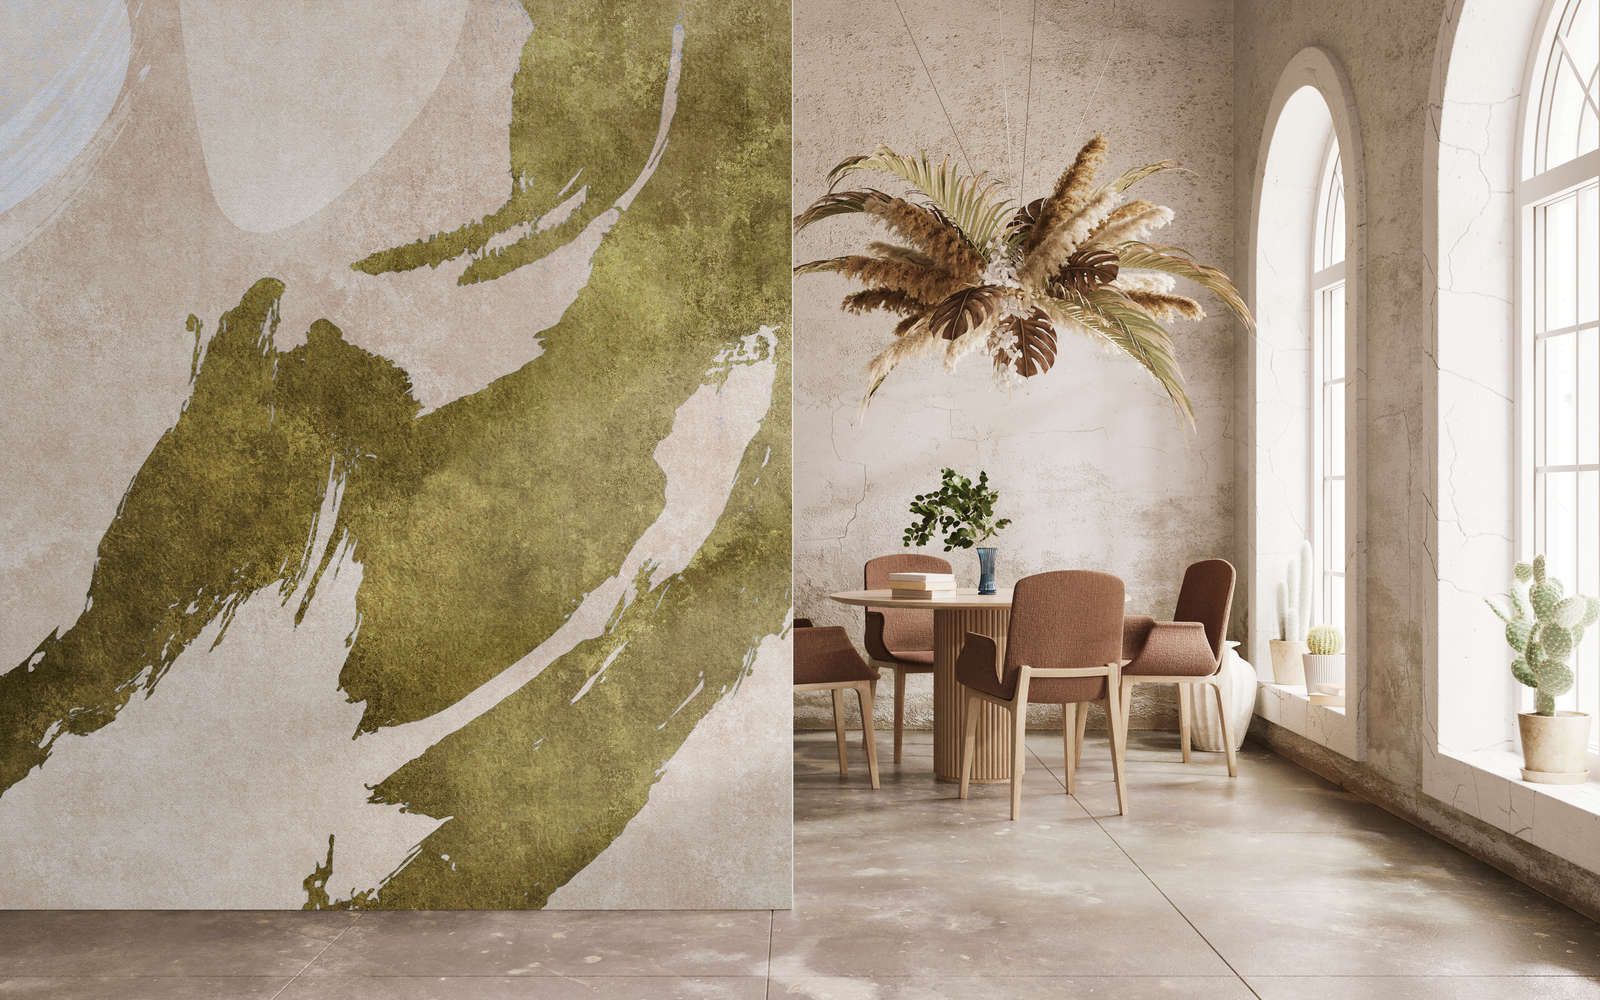             Photo wallpaper »temu« - Brushstrokes with abstract design - Green, cream with vintage plaster texture | Smooth, slightly shiny premium non-woven fabric
        